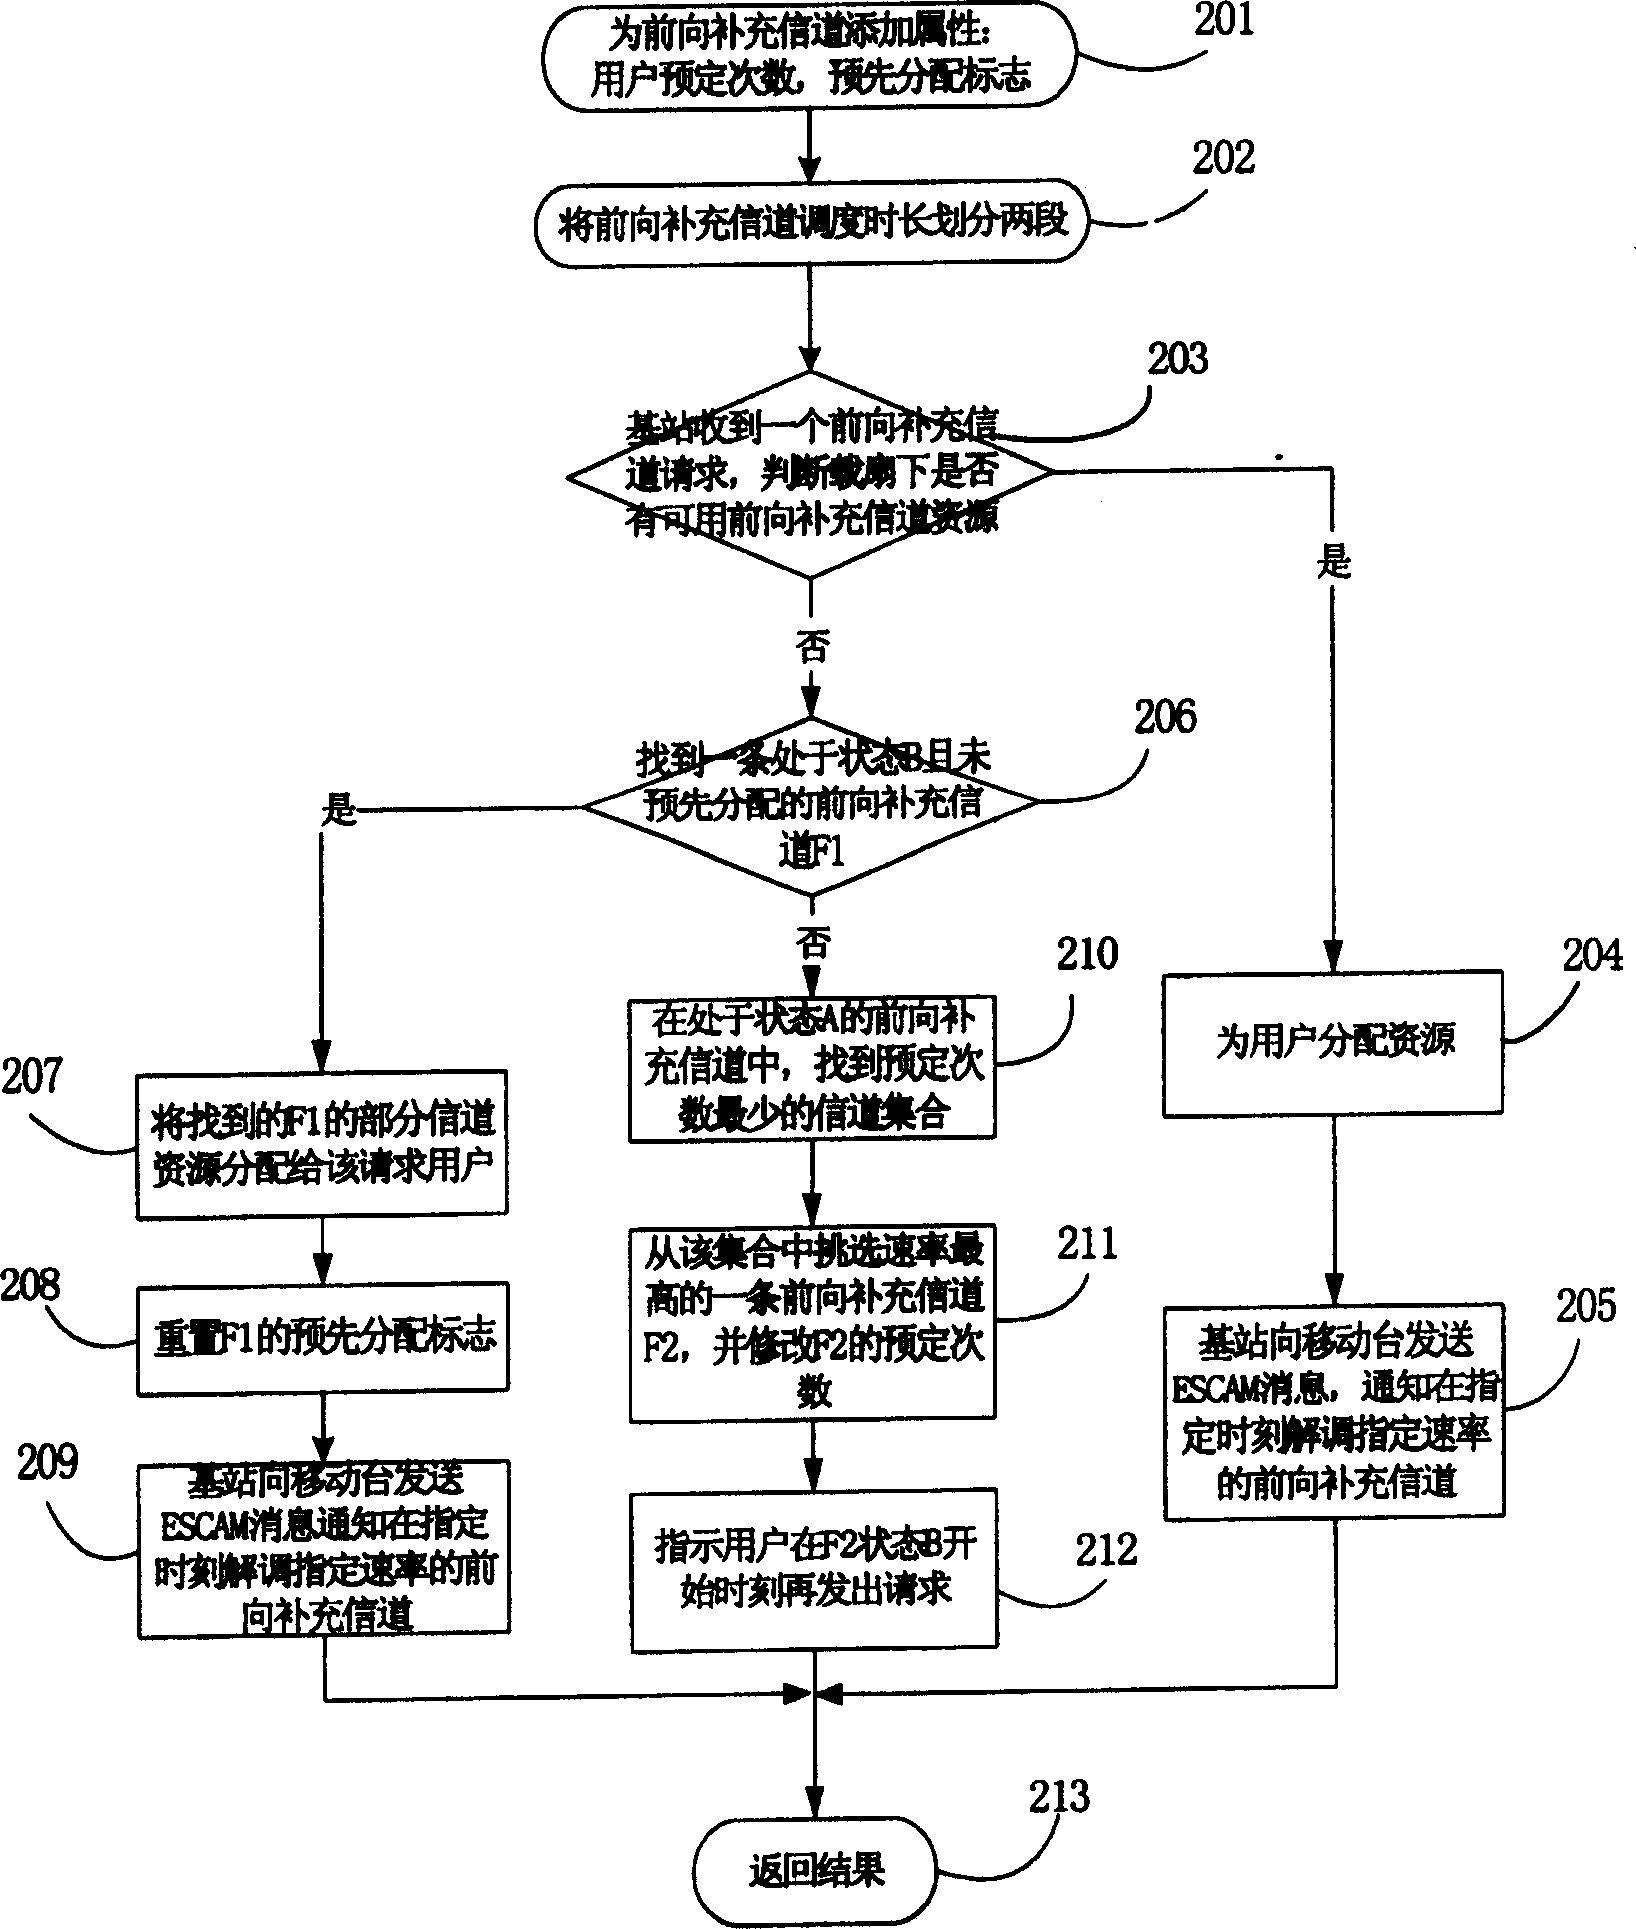 A method for speed assignation of forward direction alternate channel in CDMA system